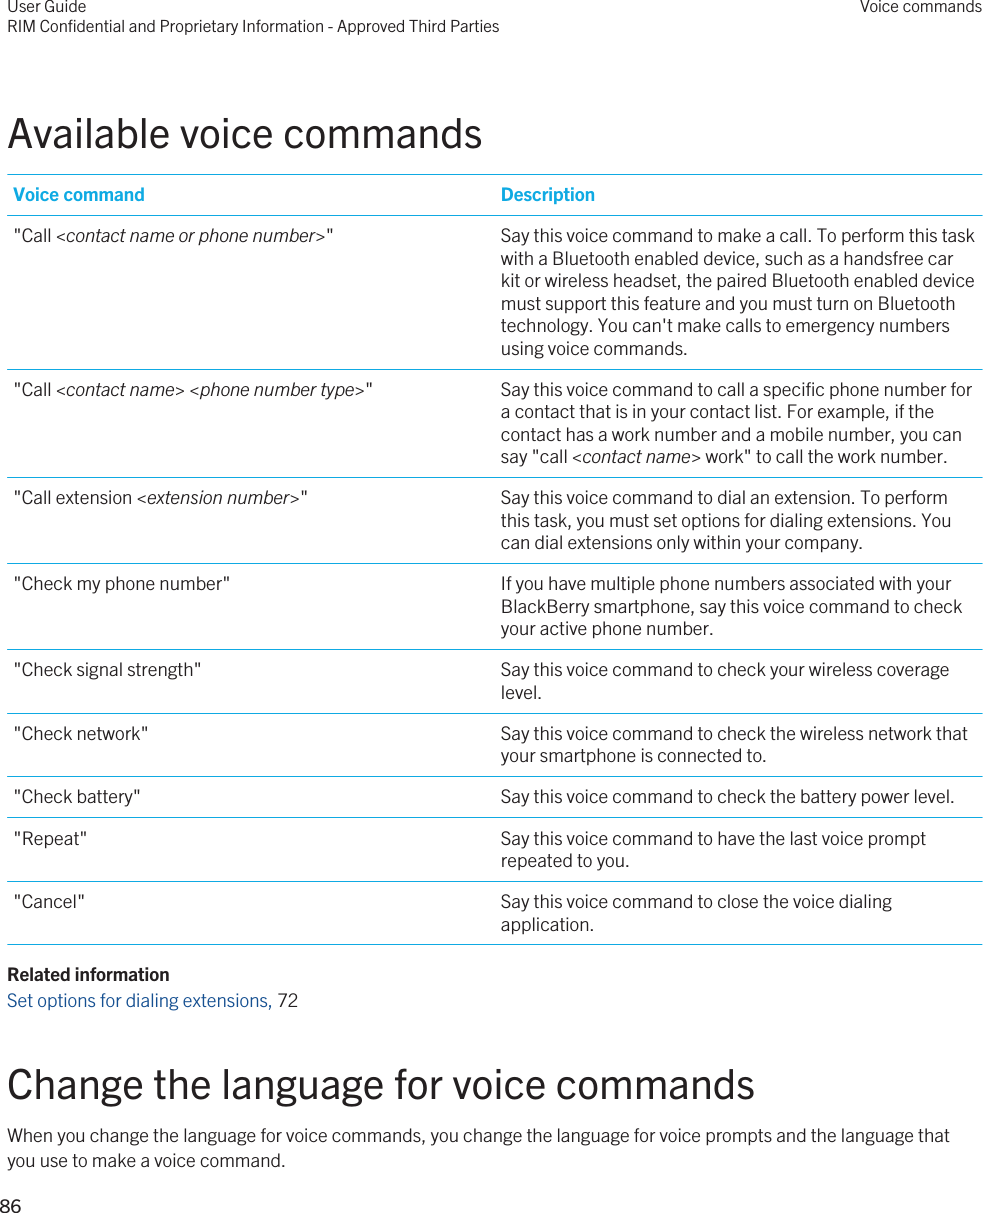 Available voice commandsVoice command Description&quot;Call &lt;contact name or phone number&gt;&quot; Say this voice command to make a call. To perform this task with a Bluetooth enabled device, such as a handsfree car kit or wireless headset, the paired Bluetooth enabled device must support this feature and you must turn on Bluetooth technology. You can&apos;t make calls to emergency numbers using voice commands.&quot;Call &lt;contact name&gt; &lt;phone number type&gt;&quot; Say this voice command to call a specific phone number for a contact that is in your contact list. For example, if the contact has a work number and a mobile number, you can say &quot;call &lt;contact name&gt; work&quot; to call the work number.&quot;Call extension &lt;extension number&gt;&quot; Say this voice command to dial an extension. To perform this task, you must set options for dialing extensions. You can dial extensions only within your company.&quot;Check my phone number&quot; If you have multiple phone numbers associated with your BlackBerry smartphone, say this voice command to check your active phone number.&quot;Check signal strength&quot; Say this voice command to check your wireless coverage level.&quot;Check network&quot; Say this voice command to check the wireless network that your smartphone is connected to.&quot;Check battery&quot; Say this voice command to check the battery power level.&quot;Repeat&quot; Say this voice command to have the last voice prompt repeated to you.&quot;Cancel&quot; Say this voice command to close the voice dialing application.Related informationSet options for dialing extensions, 72 Change the language for voice commandsWhen you change the language for voice commands, you change the language for voice prompts and the language that you use to make a voice command.User GuideRIM Confidential and Proprietary Information - Approved Third PartiesVoice commands86 